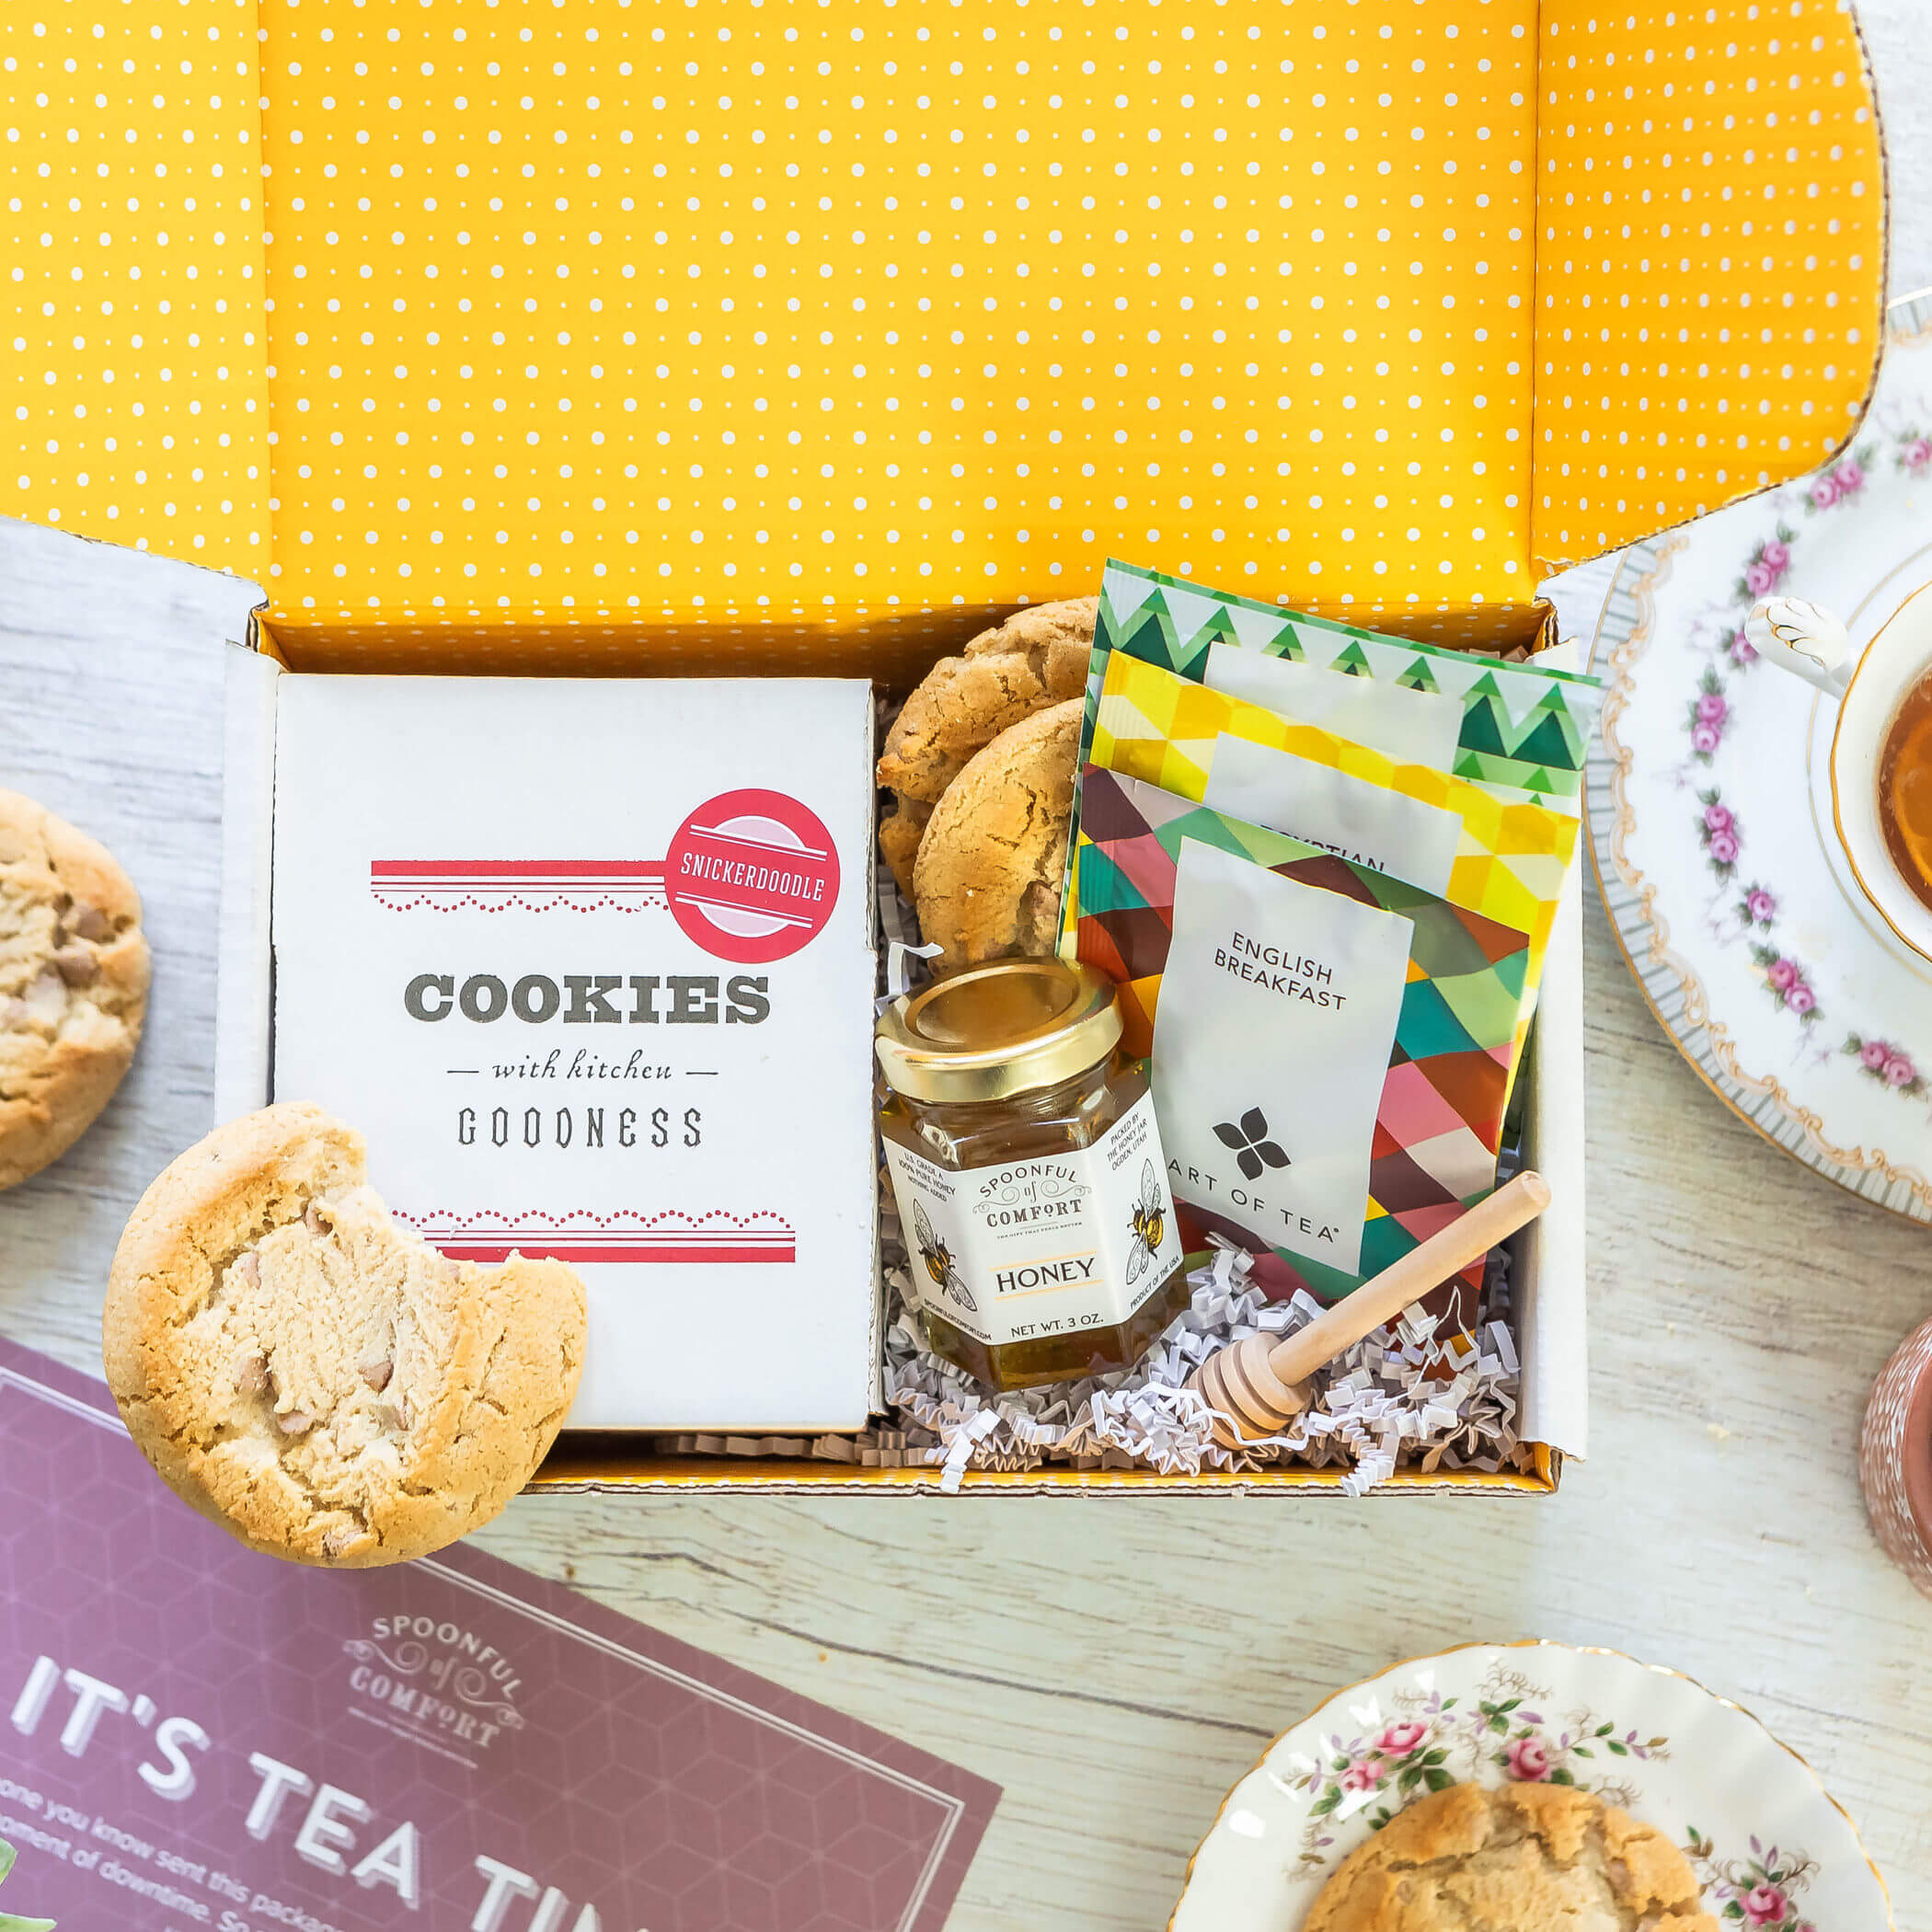 A care package with tea and cookies